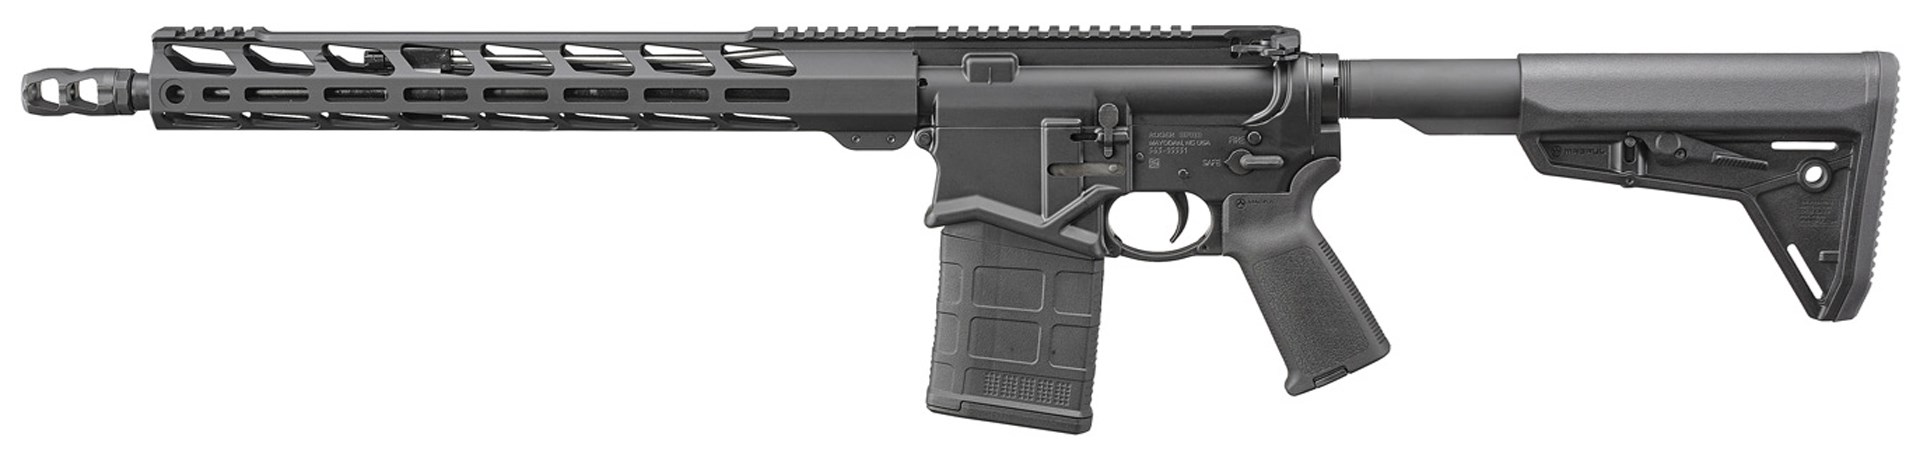 Ruger SFAR left-side gun rifle semi-automatic on white